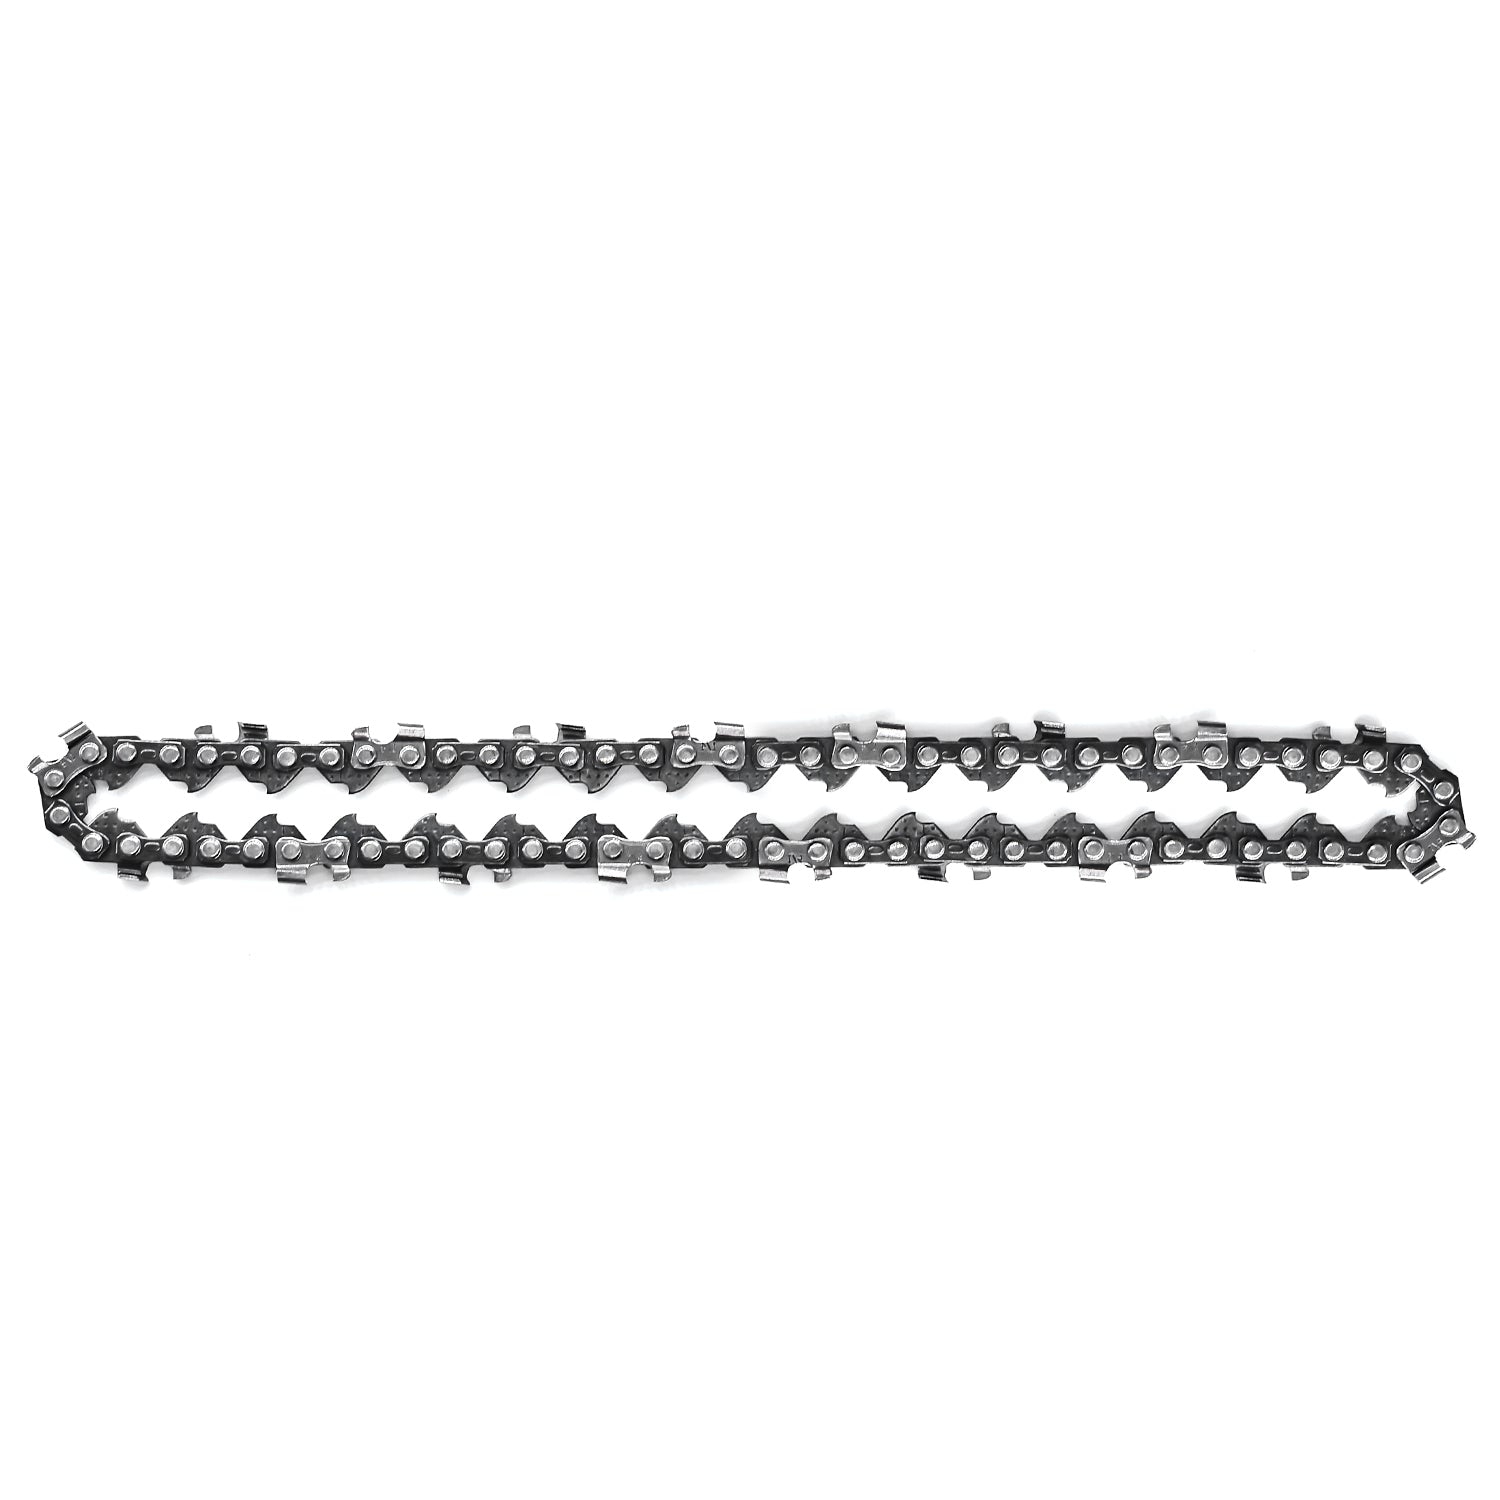 Replacement Chain - Imoum